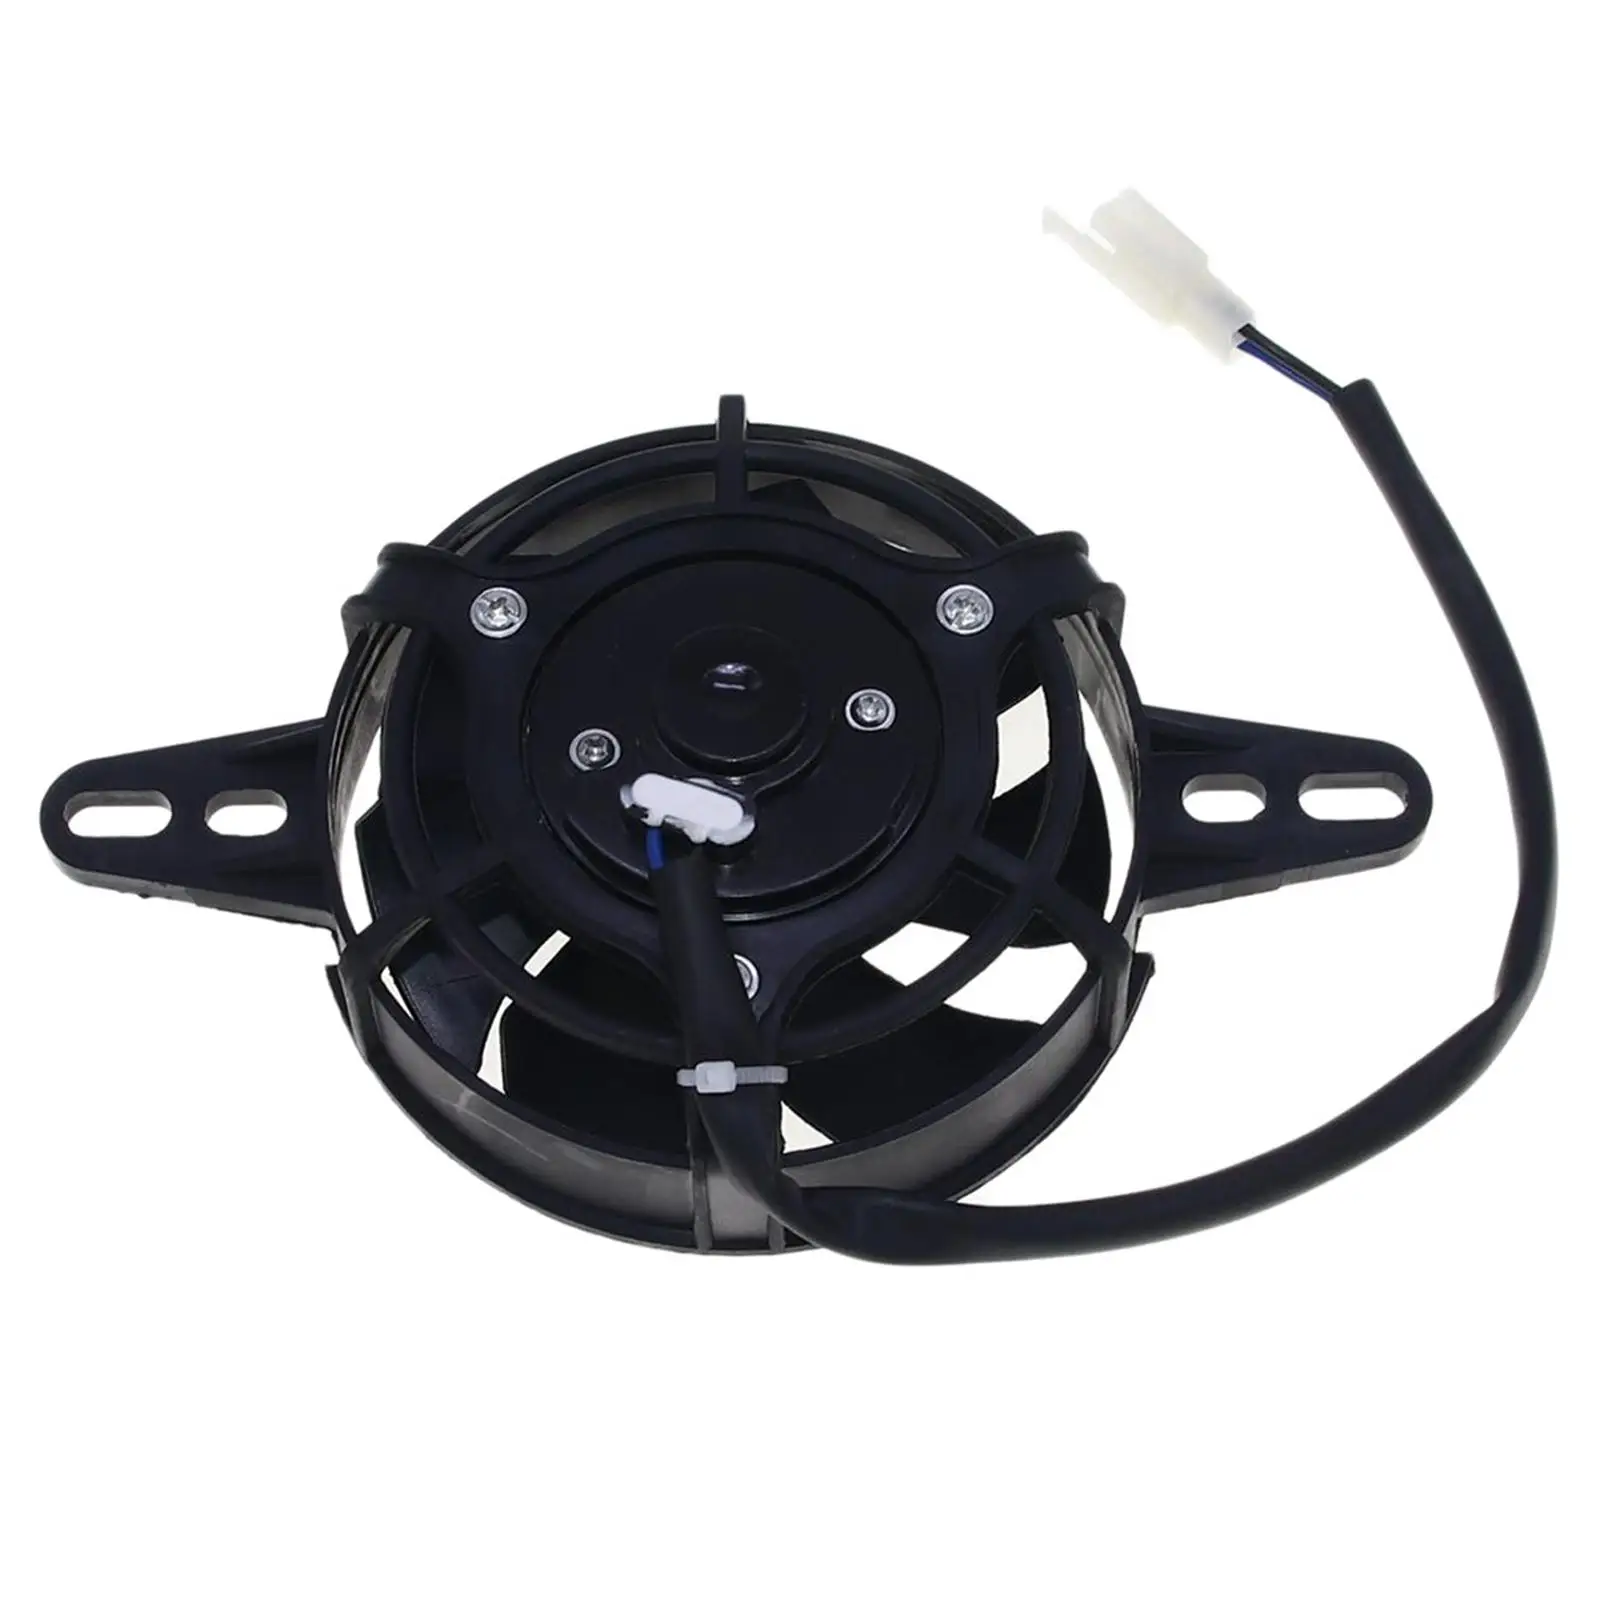 Motorcycle Radiator Cooling Fan Replaces Parts Premium Oil Cooler Water Cooler